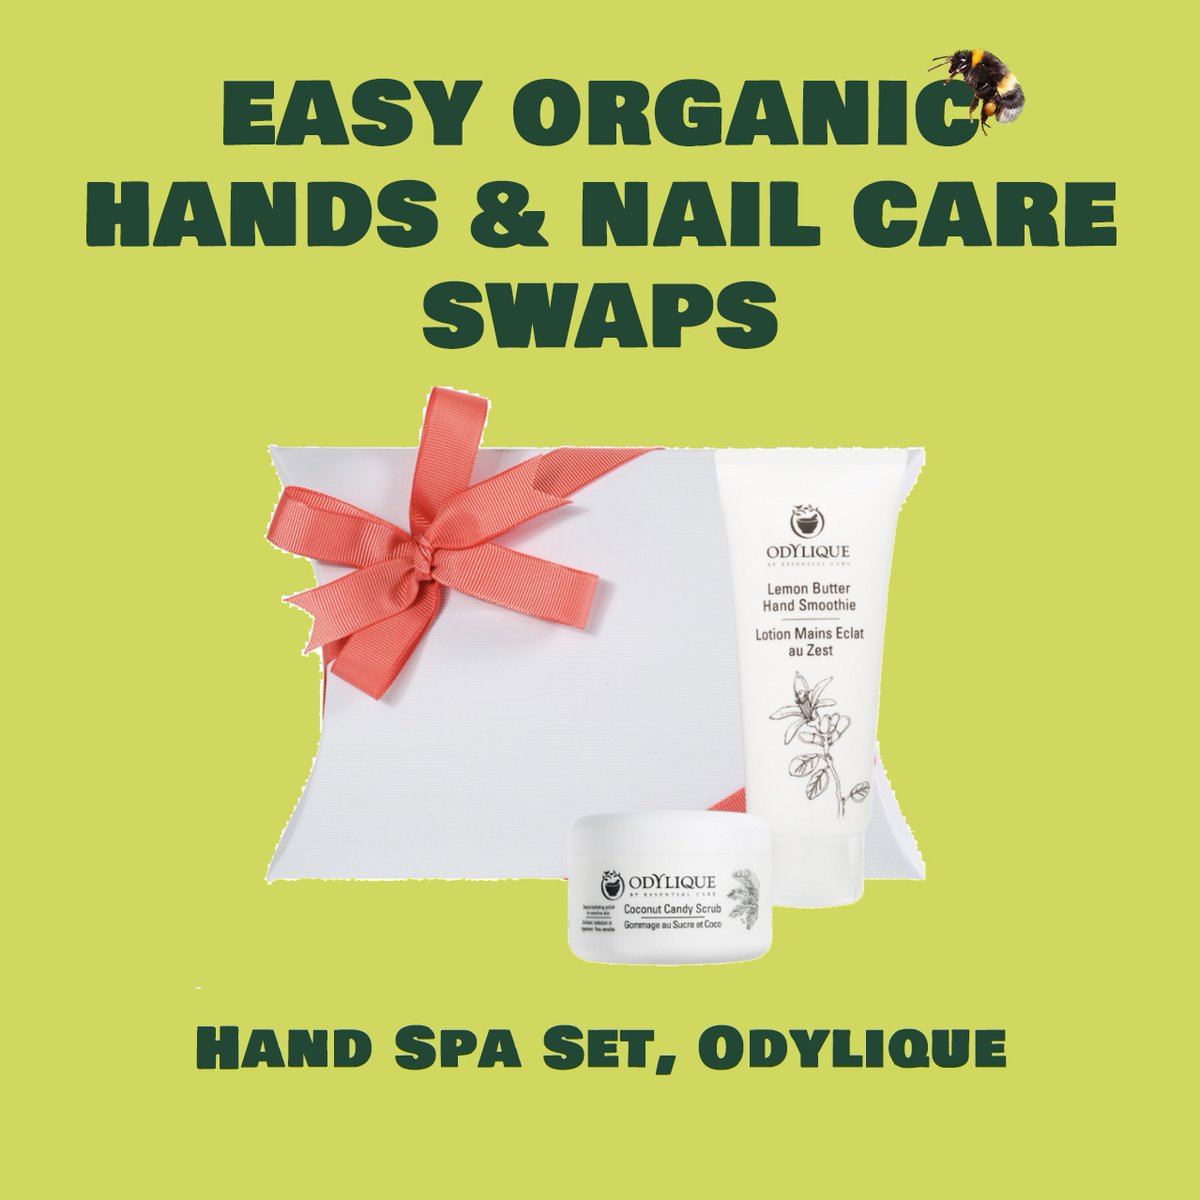 A nice selection of brands to look at:⁠ @herbfarmacy @RhugWildBeauty @benecosUK @Odylique
⁠
#organicnailcare #goorganic #organichandcare #nailcare #handcare